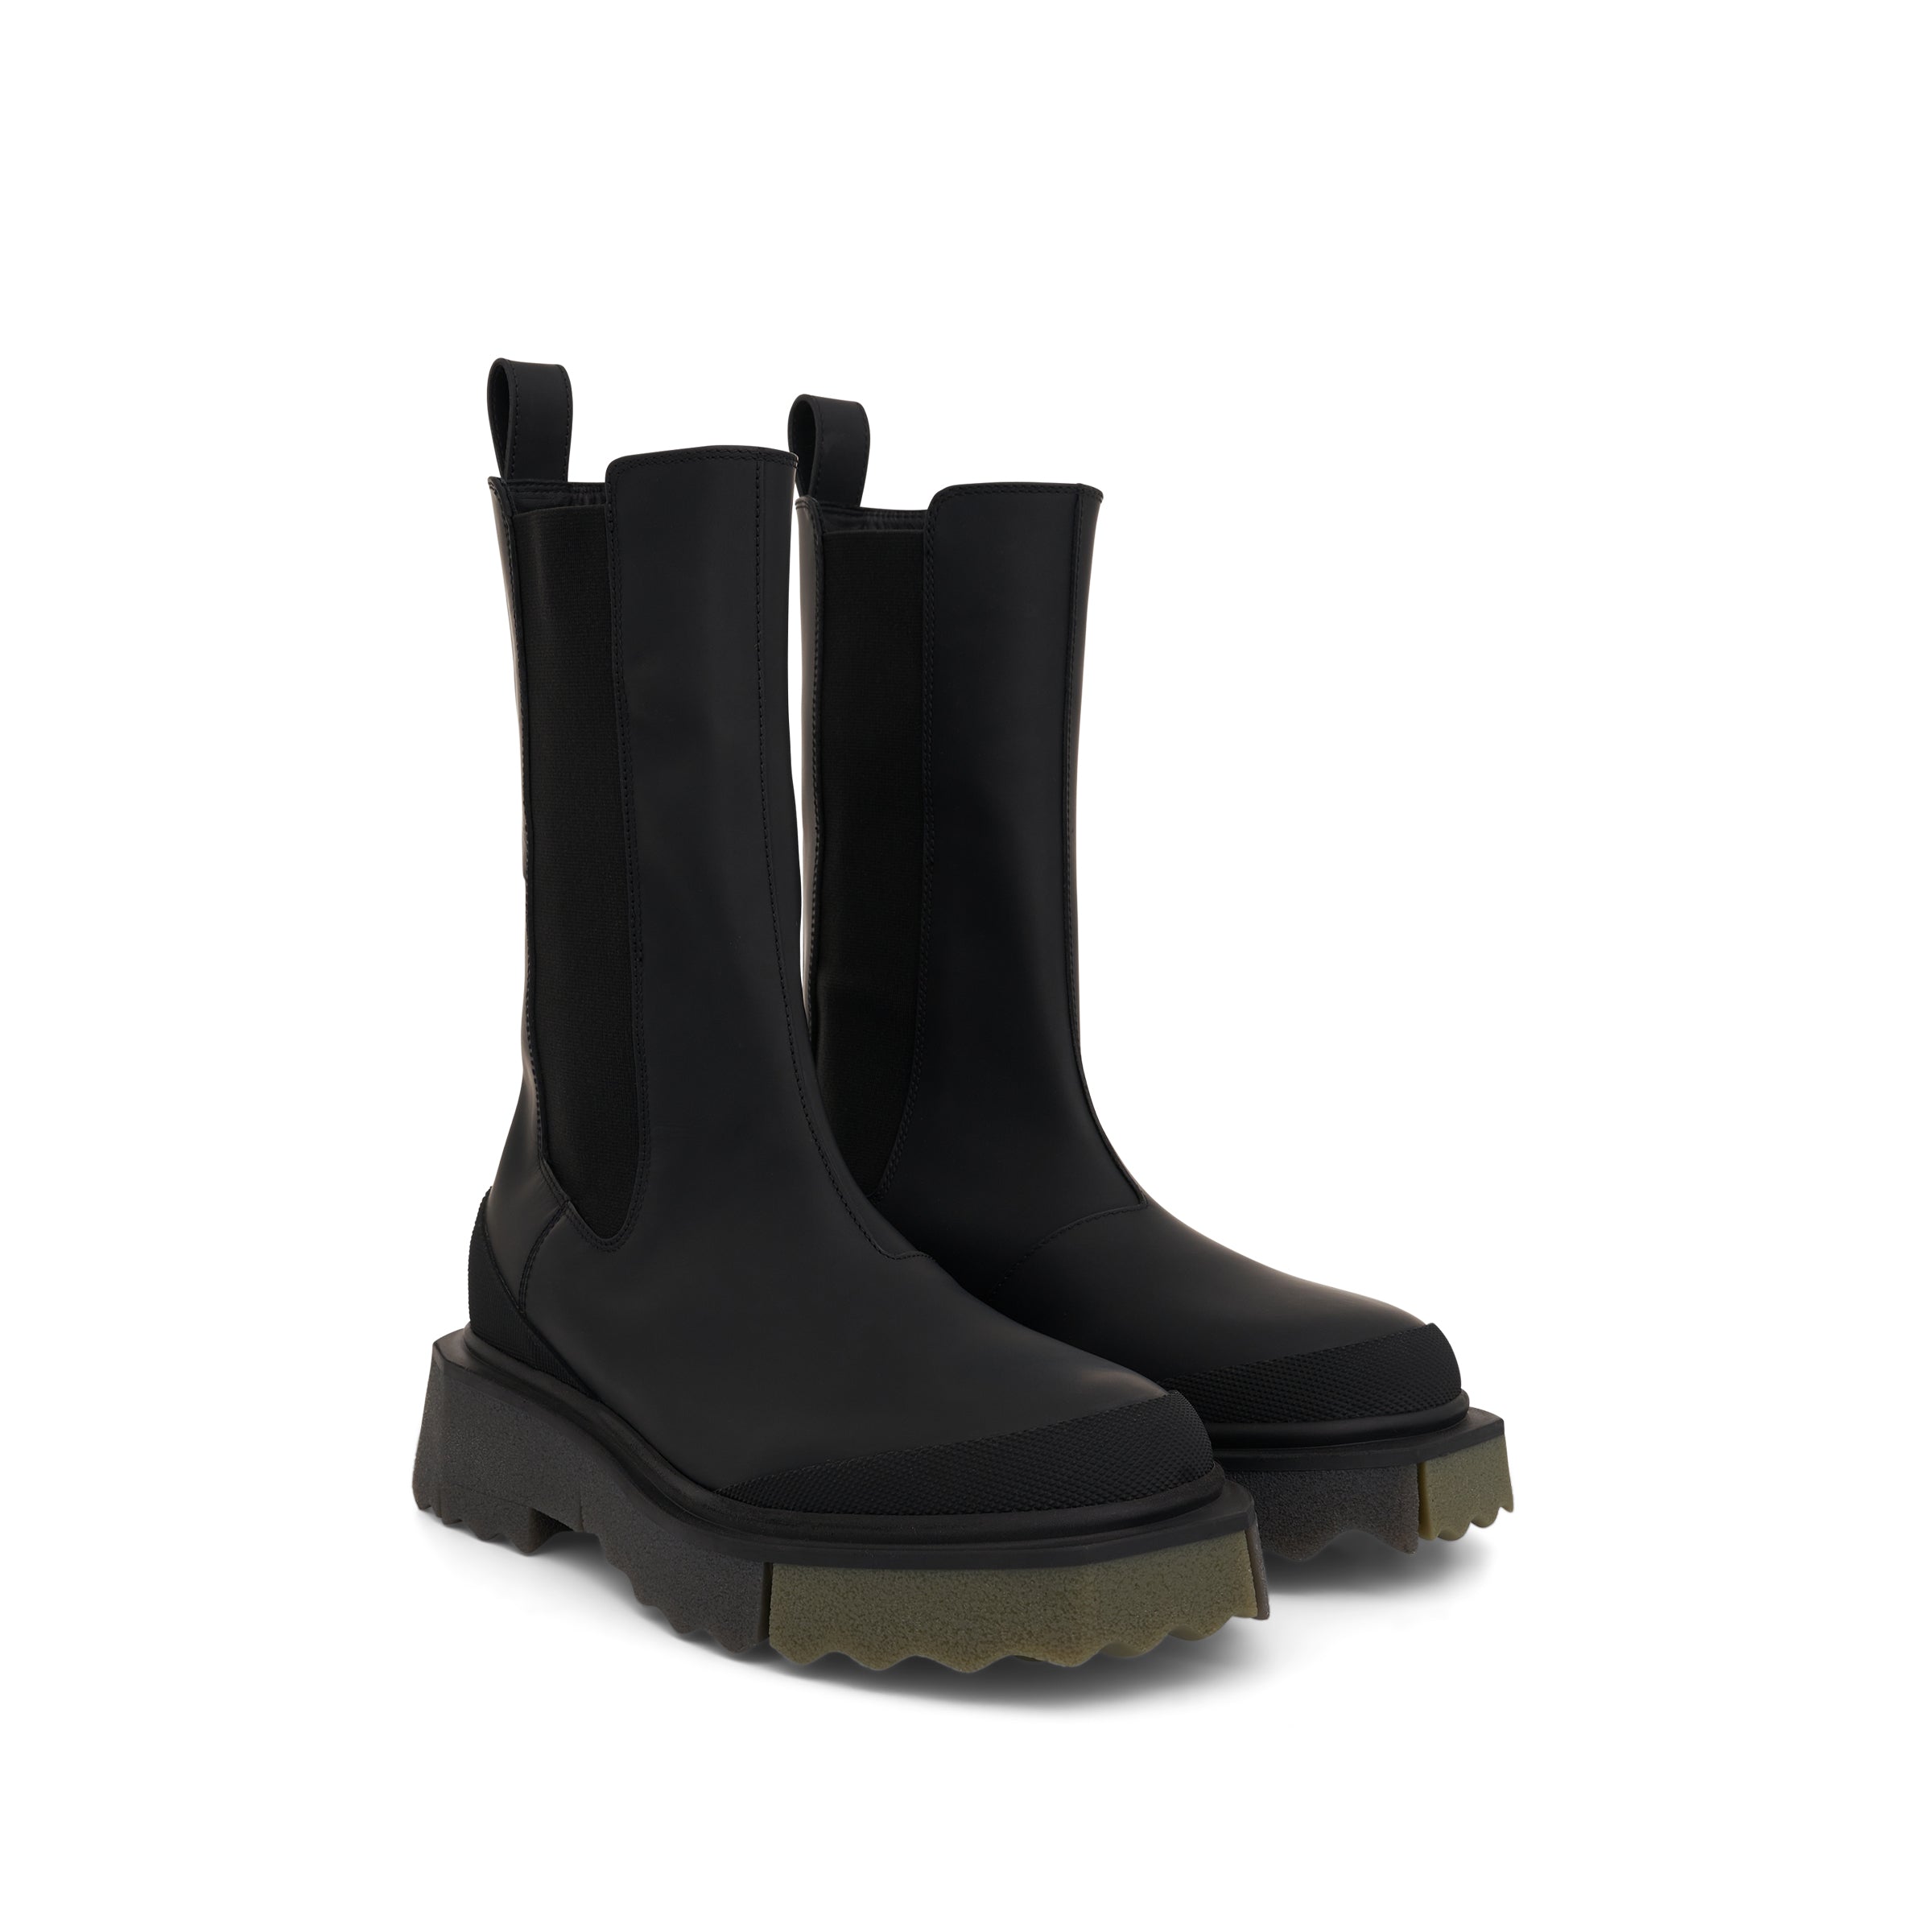 off white calf sponge chelsea boot in black military sold out sold out ...